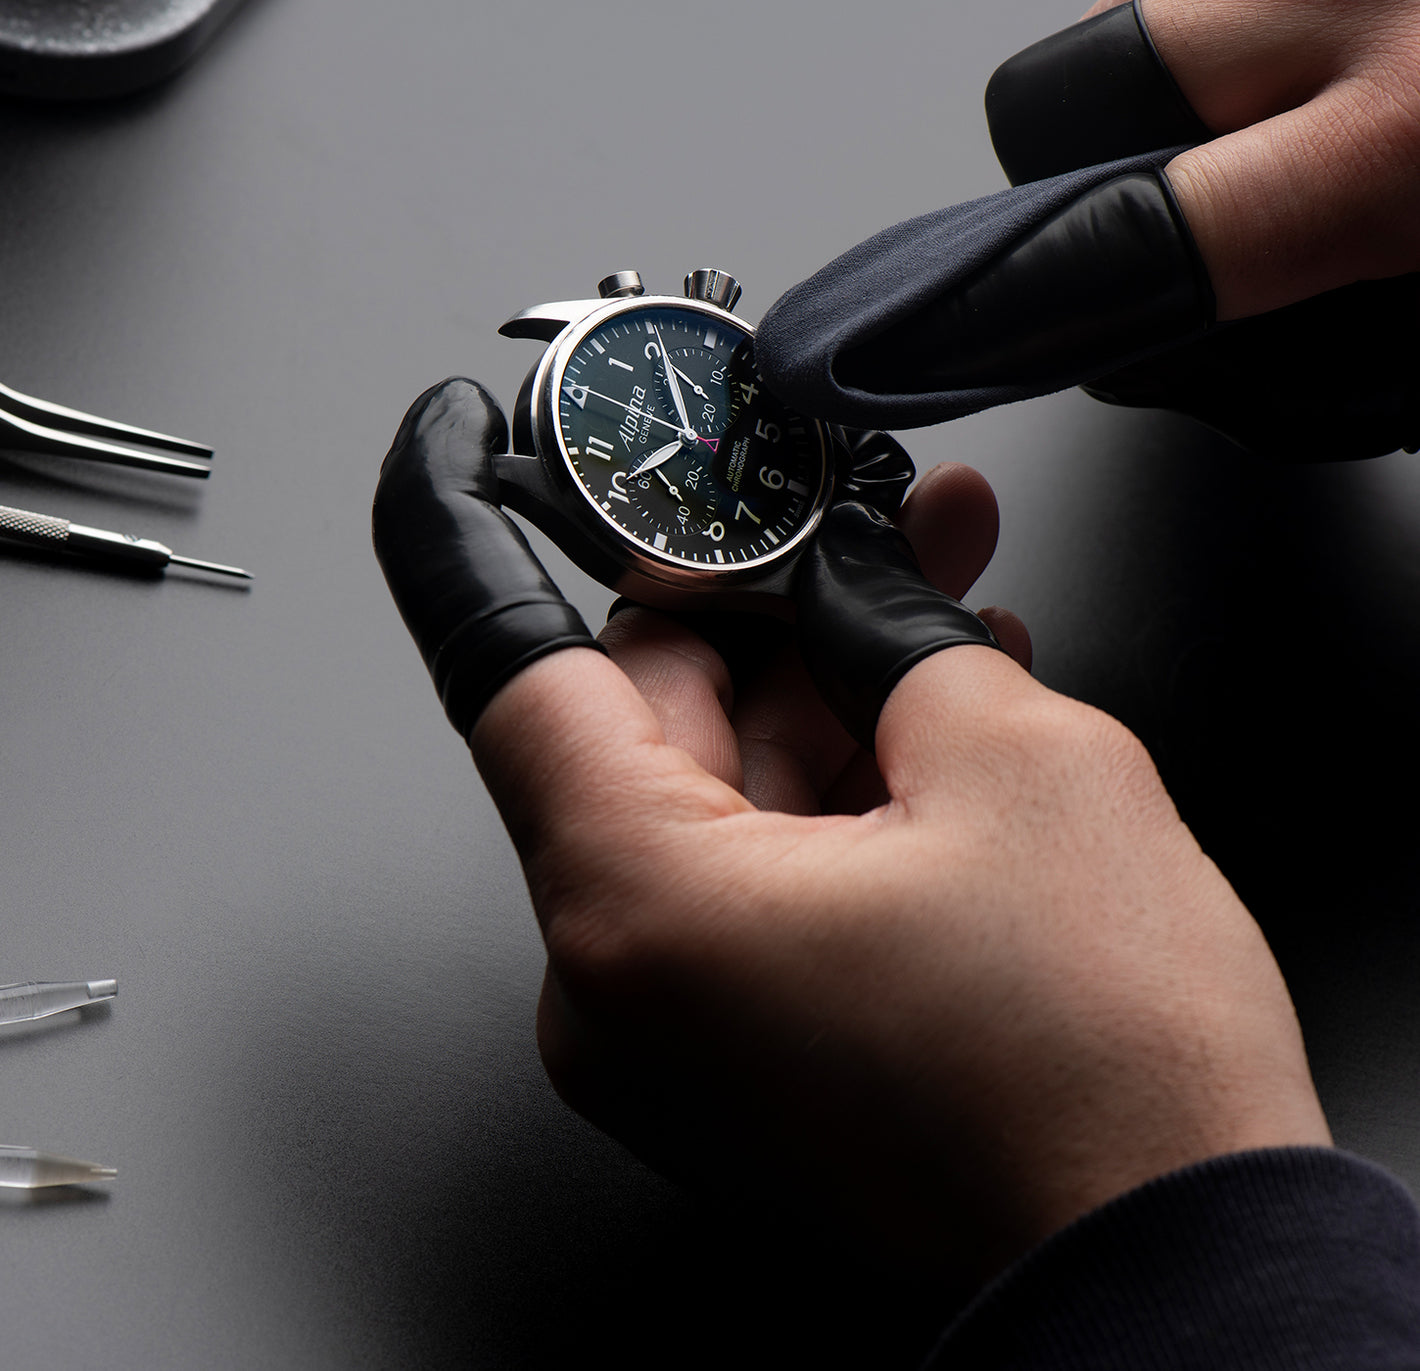 Alpina watch being made, polished by Swiss watchmaker